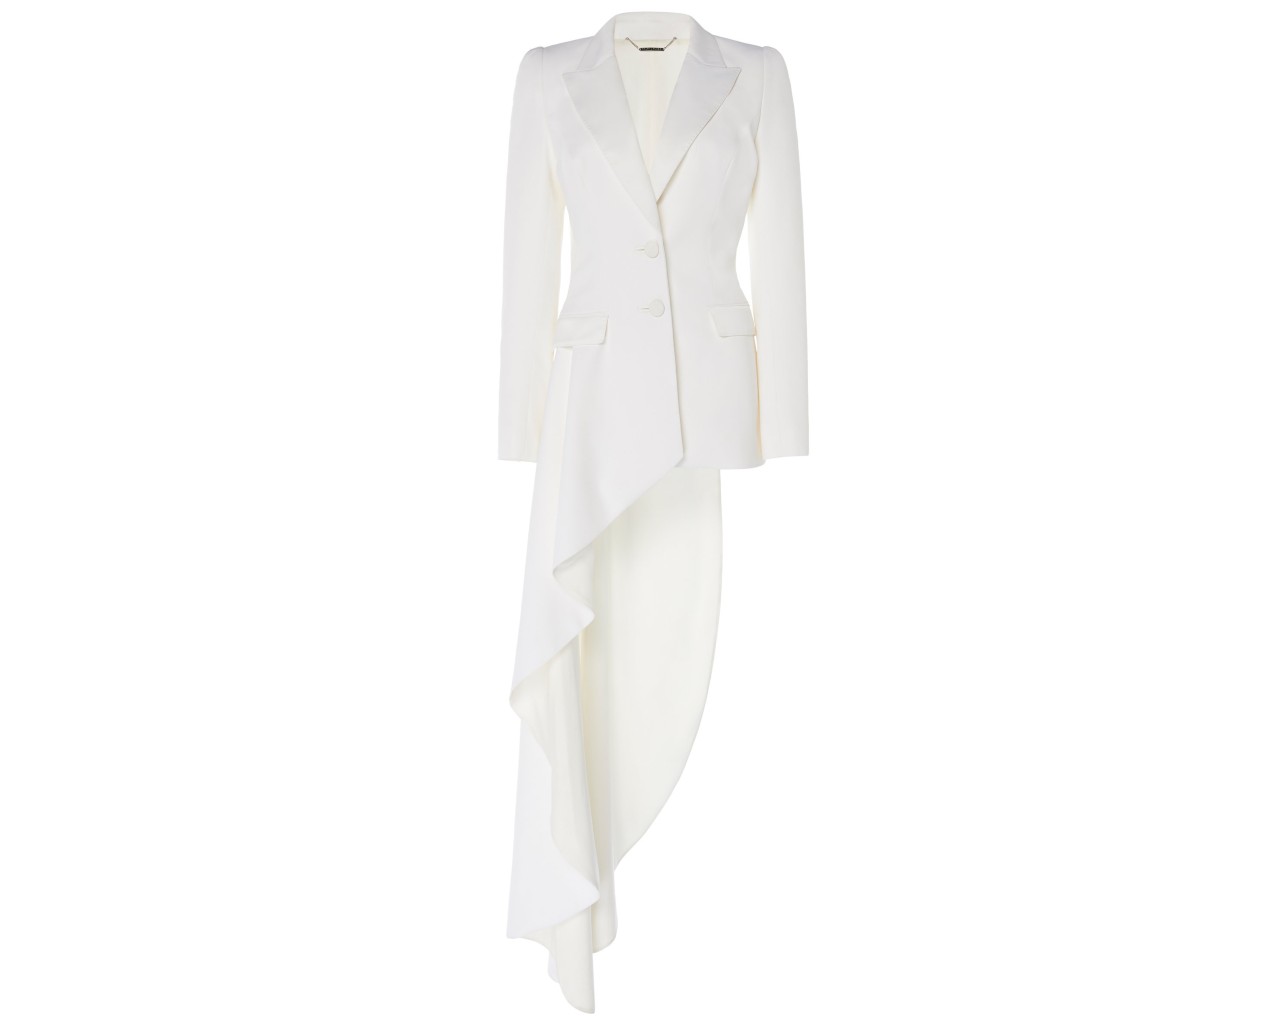 Ralph & Russo Asymmetric Crepe Blazer, inspired by the suffragette suit Kamala Harris wore during victory speech